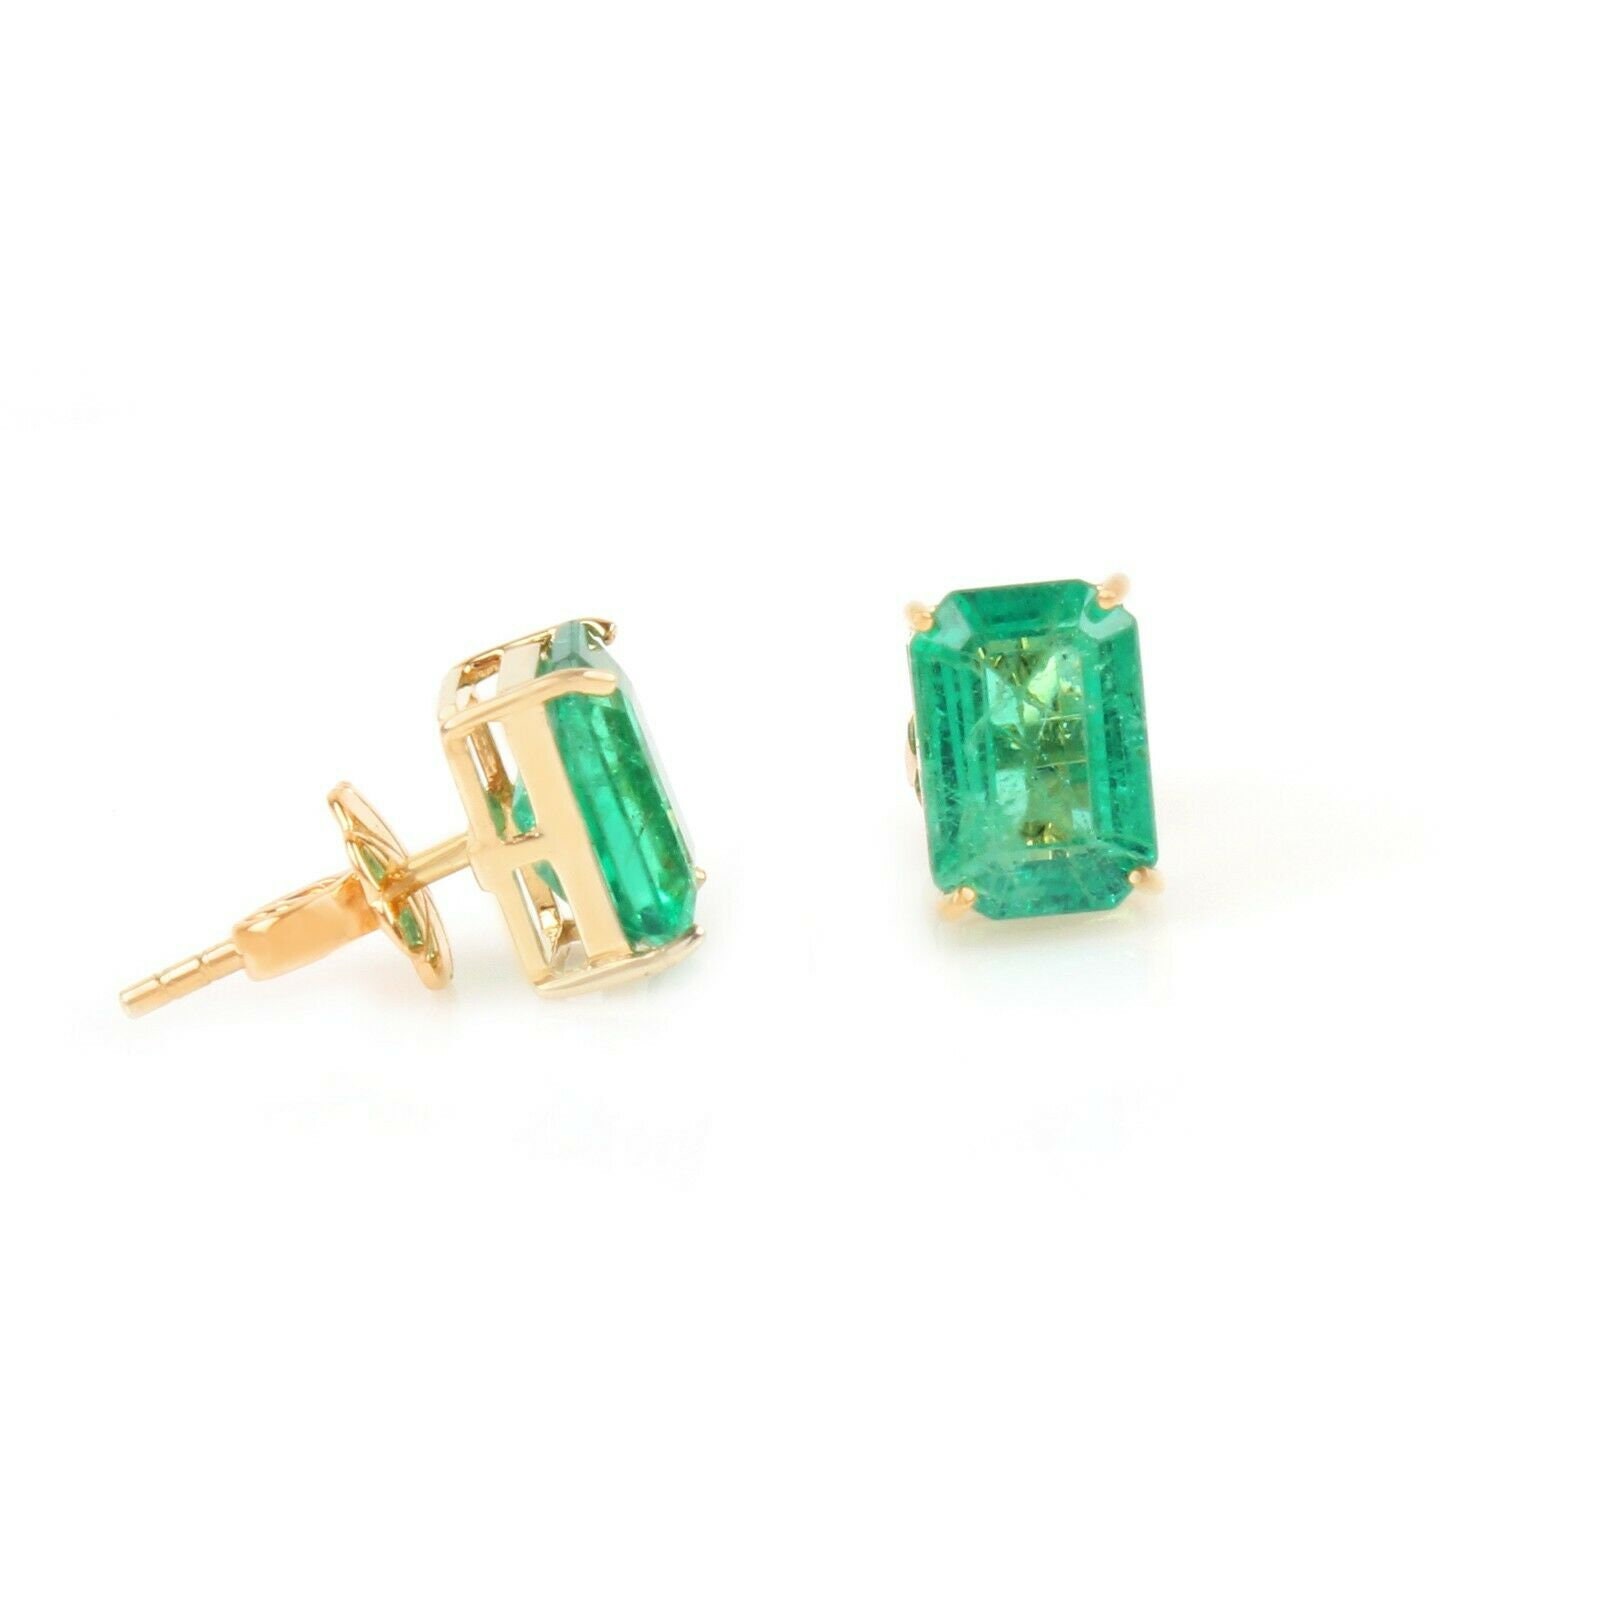 New 10K 18K Yellow Gold Emerald Stud Earrings, 1 Pair Of 14K Solid Earrings Jewelry, Gift For Her